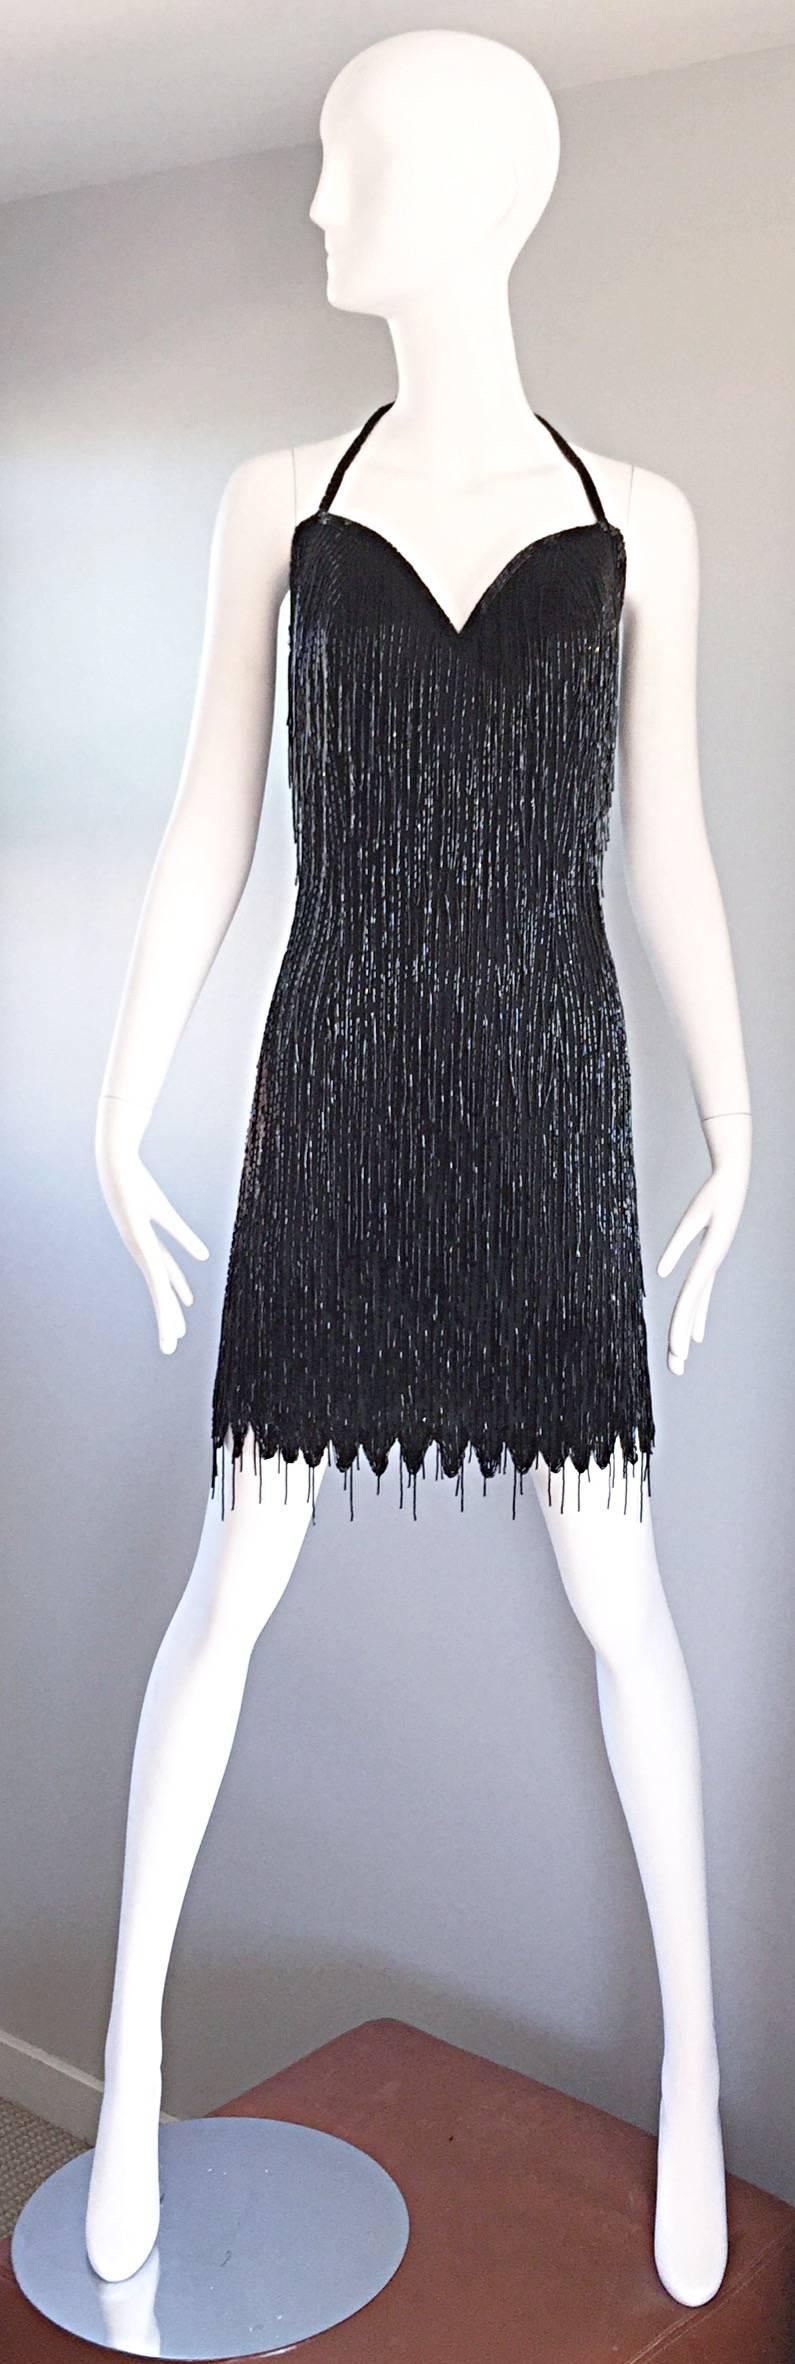 Amazing vintage black silk heavily beaded fringed 'Flapper' style 1990s does 1920s halter dress! Features thousands of hand-sewn black beaded tassels over the entire dress. Scalloped hem. Boned bodice, with a hidden zipper up the back, and